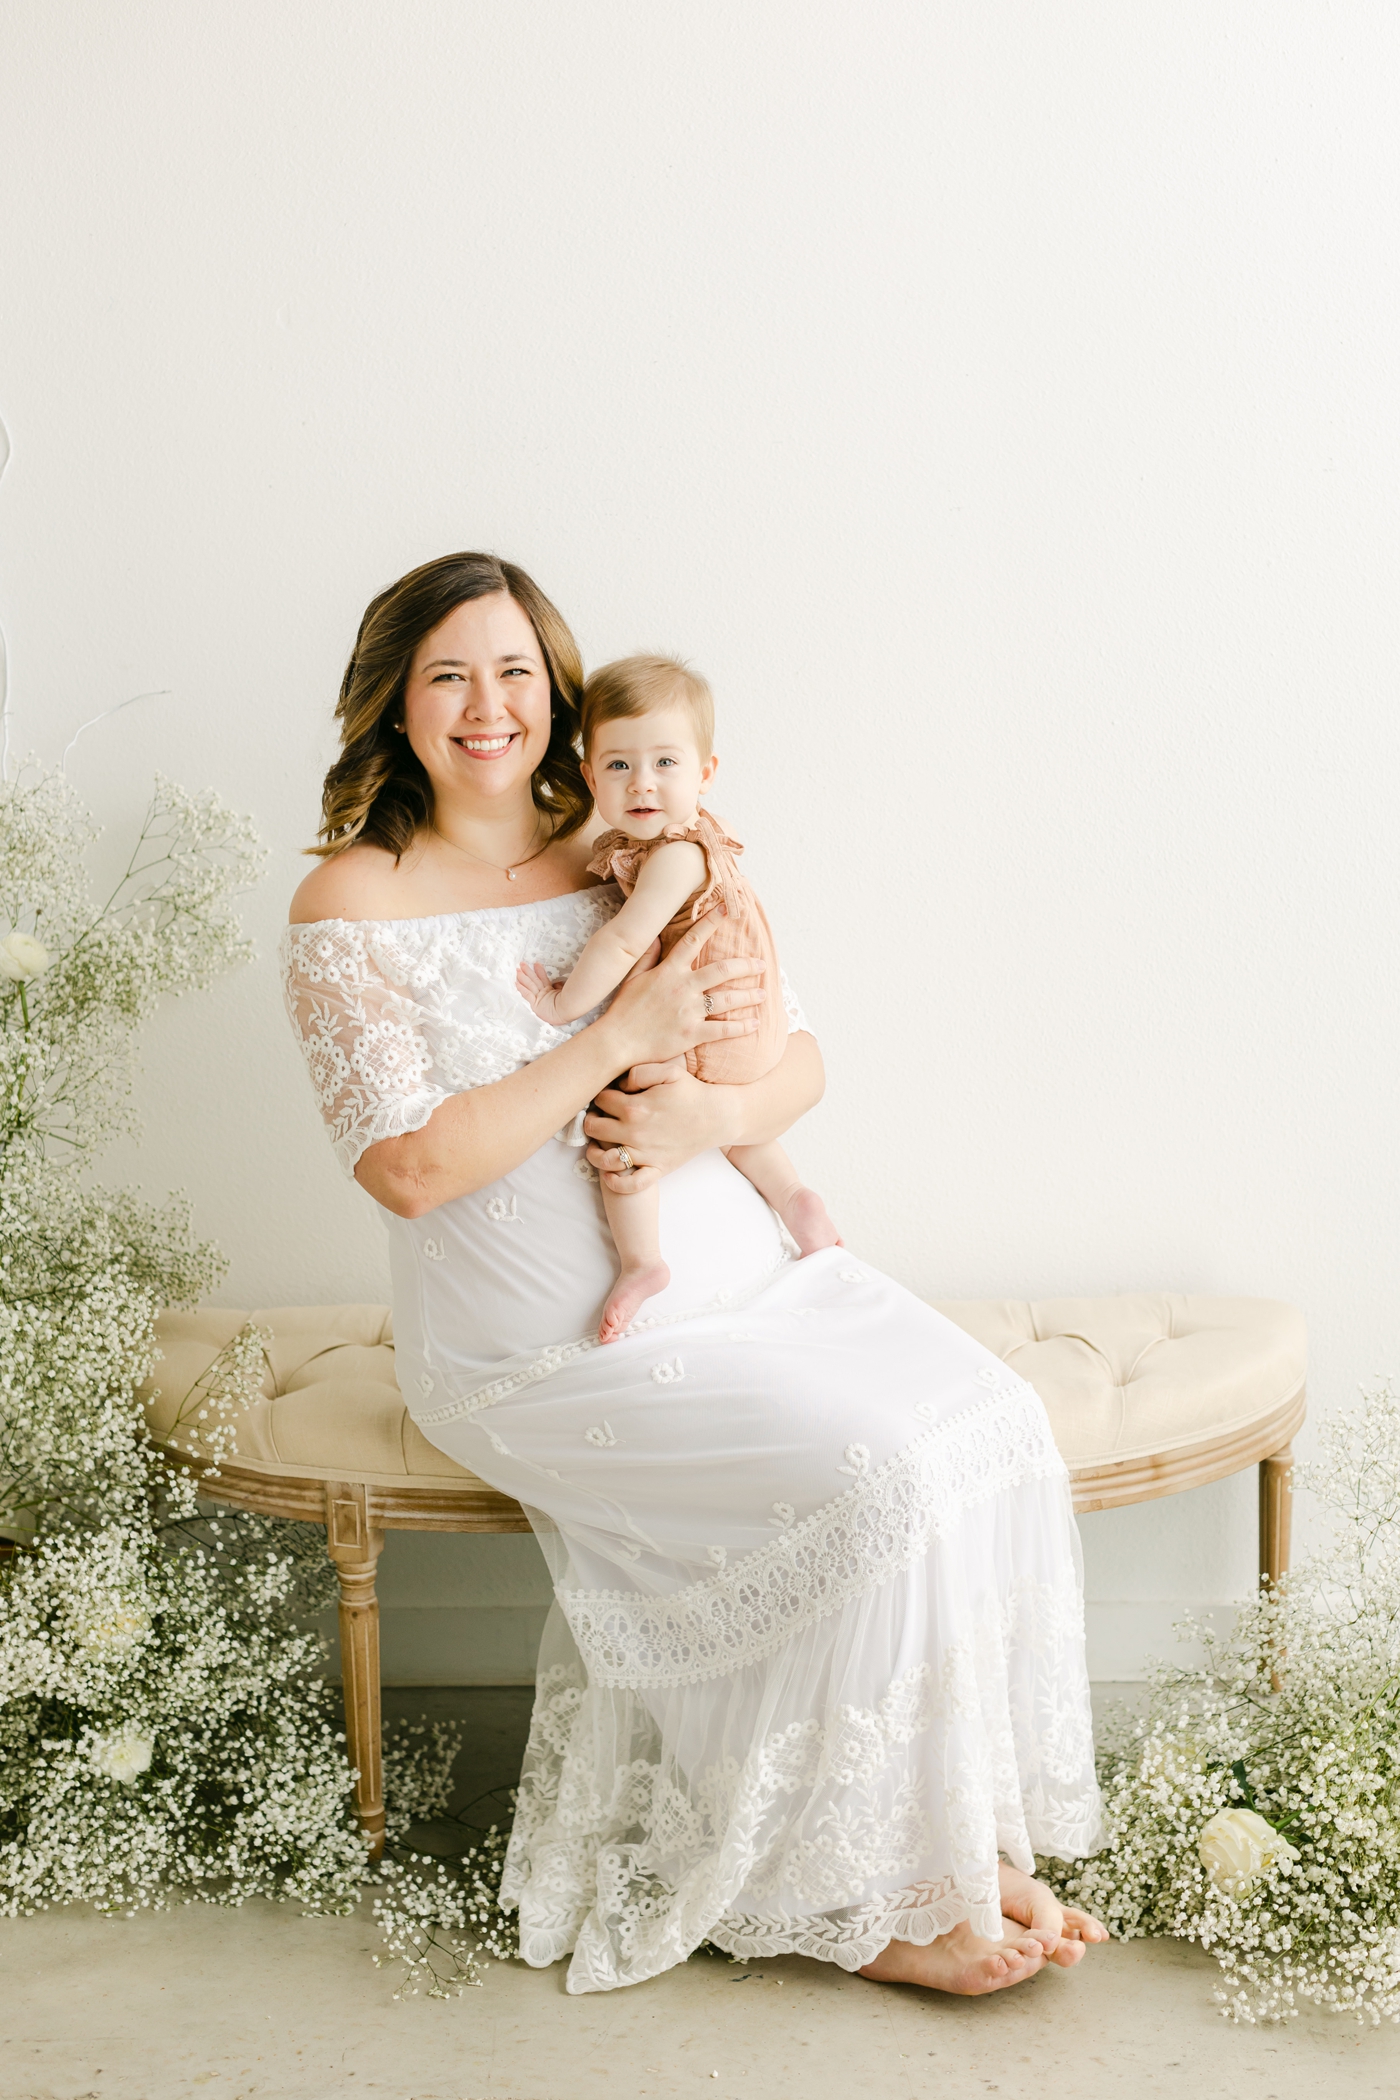 Mom in white lace maxi dress holding baby as they smile at the camera. Photo by Sana Ahmed Photography.